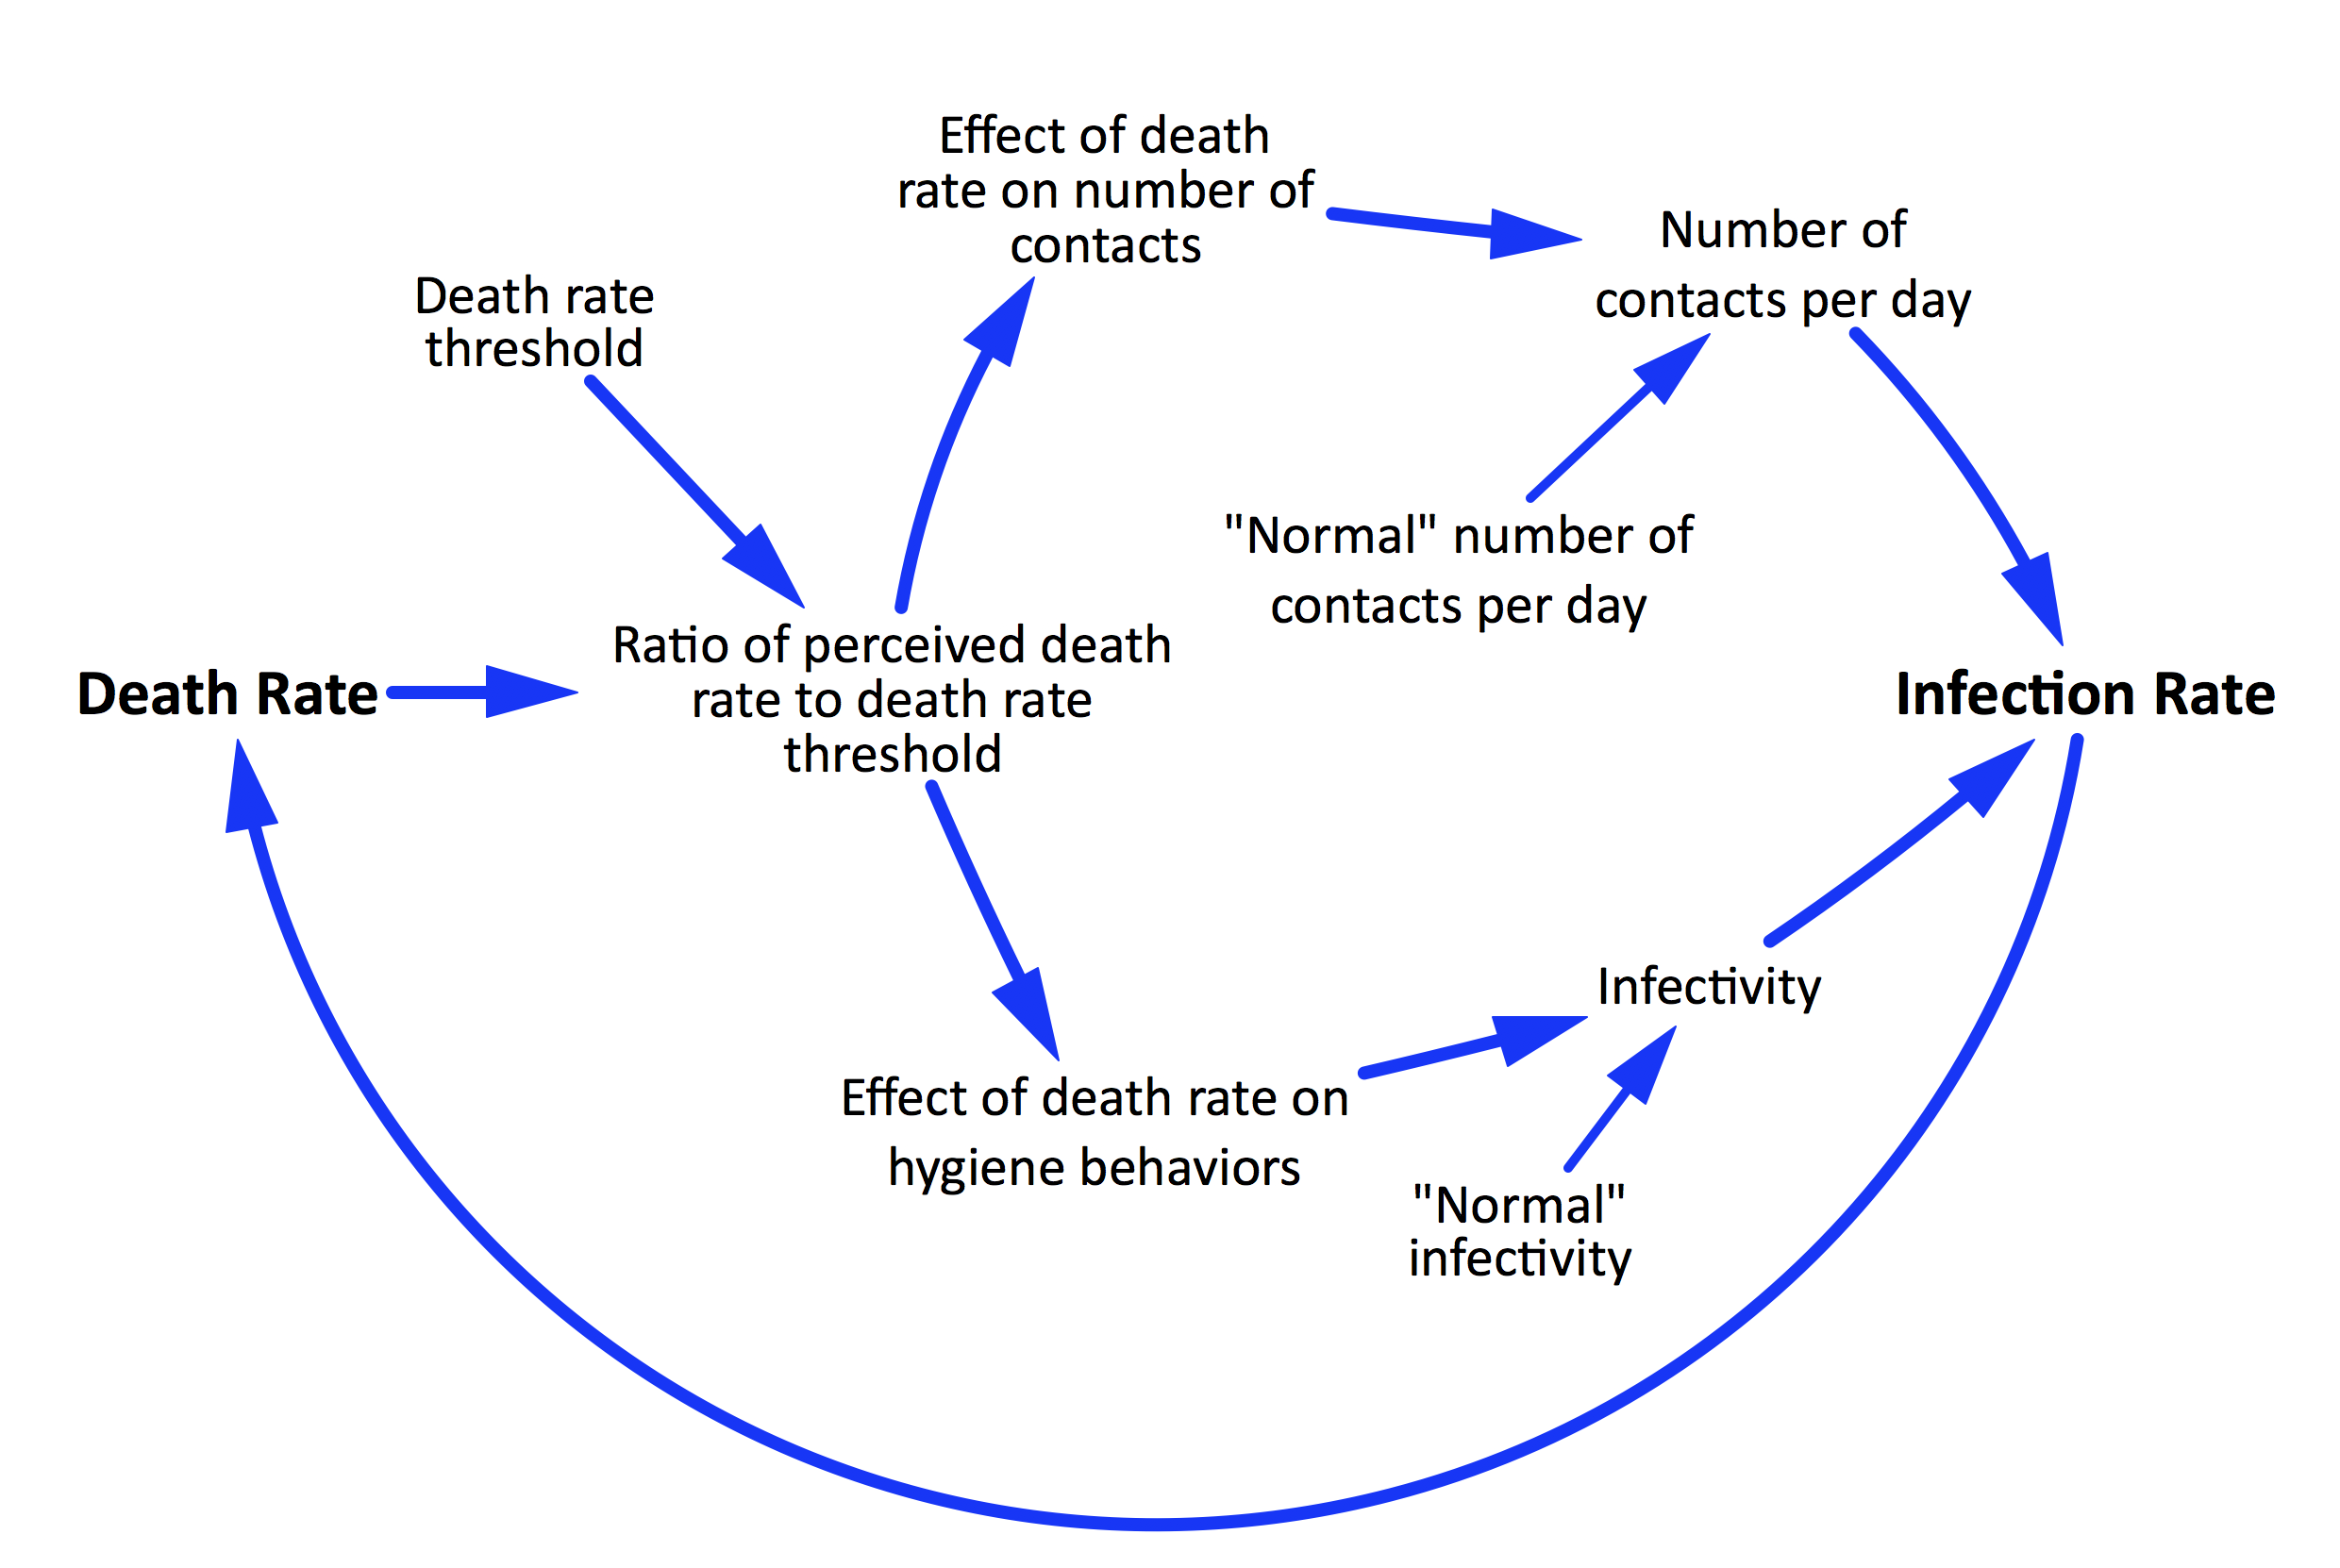 Figure 1. How Ali's model connects death rate to infection rate